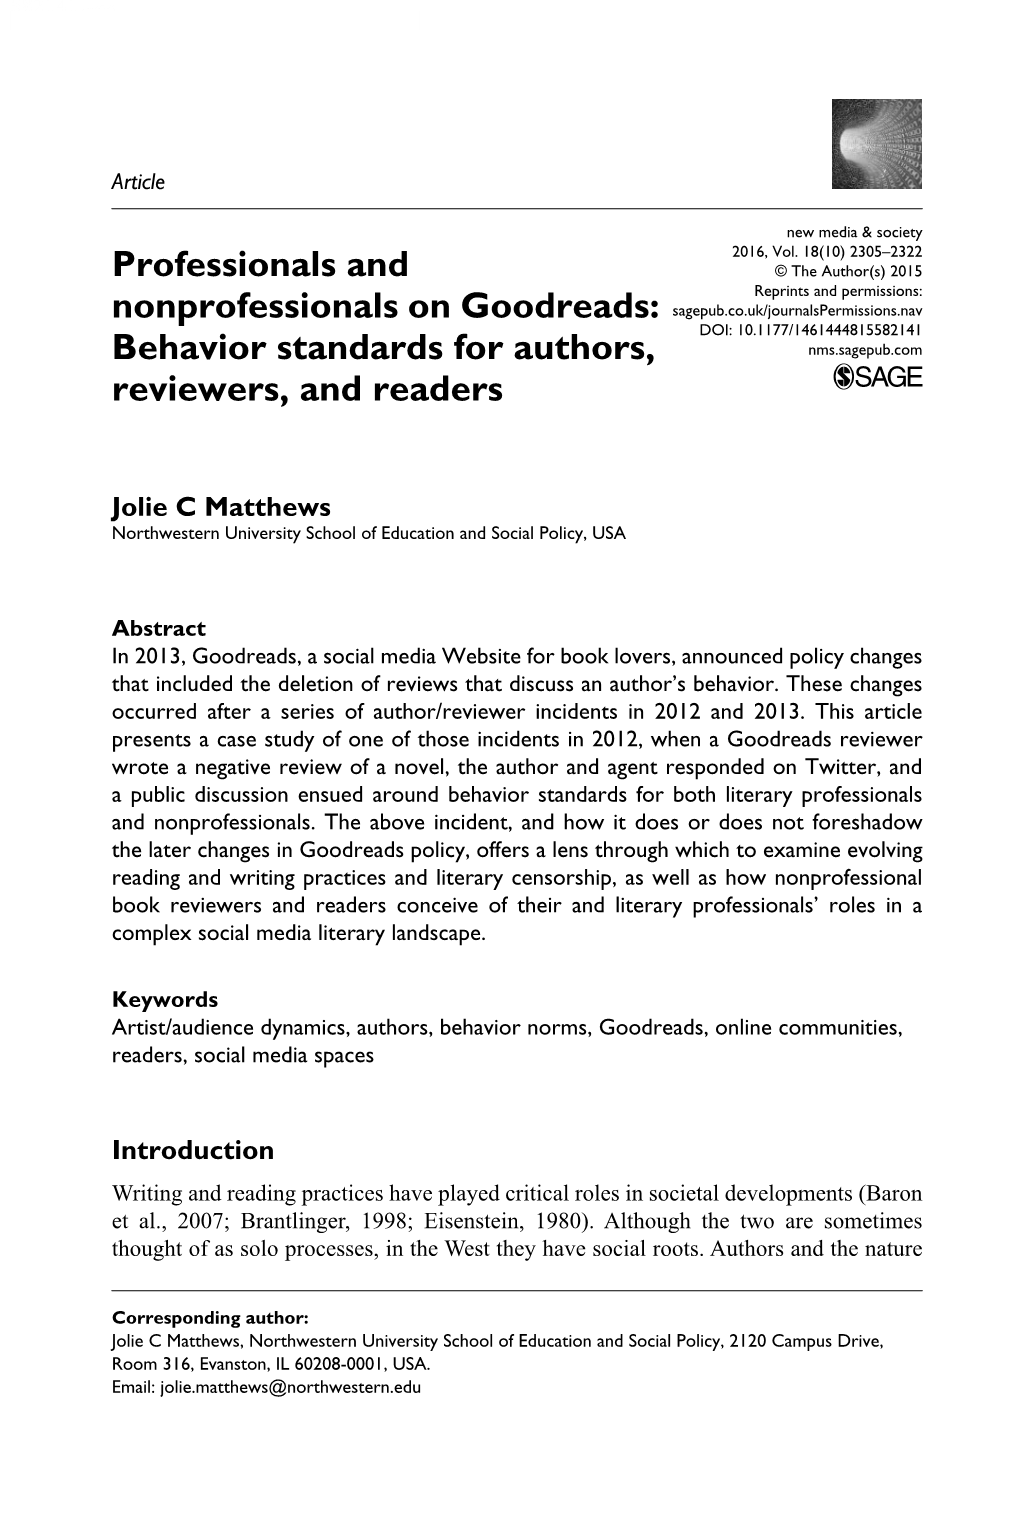 Professionals and Nonprofessionals on Goodreads: Behavior Standards for Authors, Reviewers, and Readers